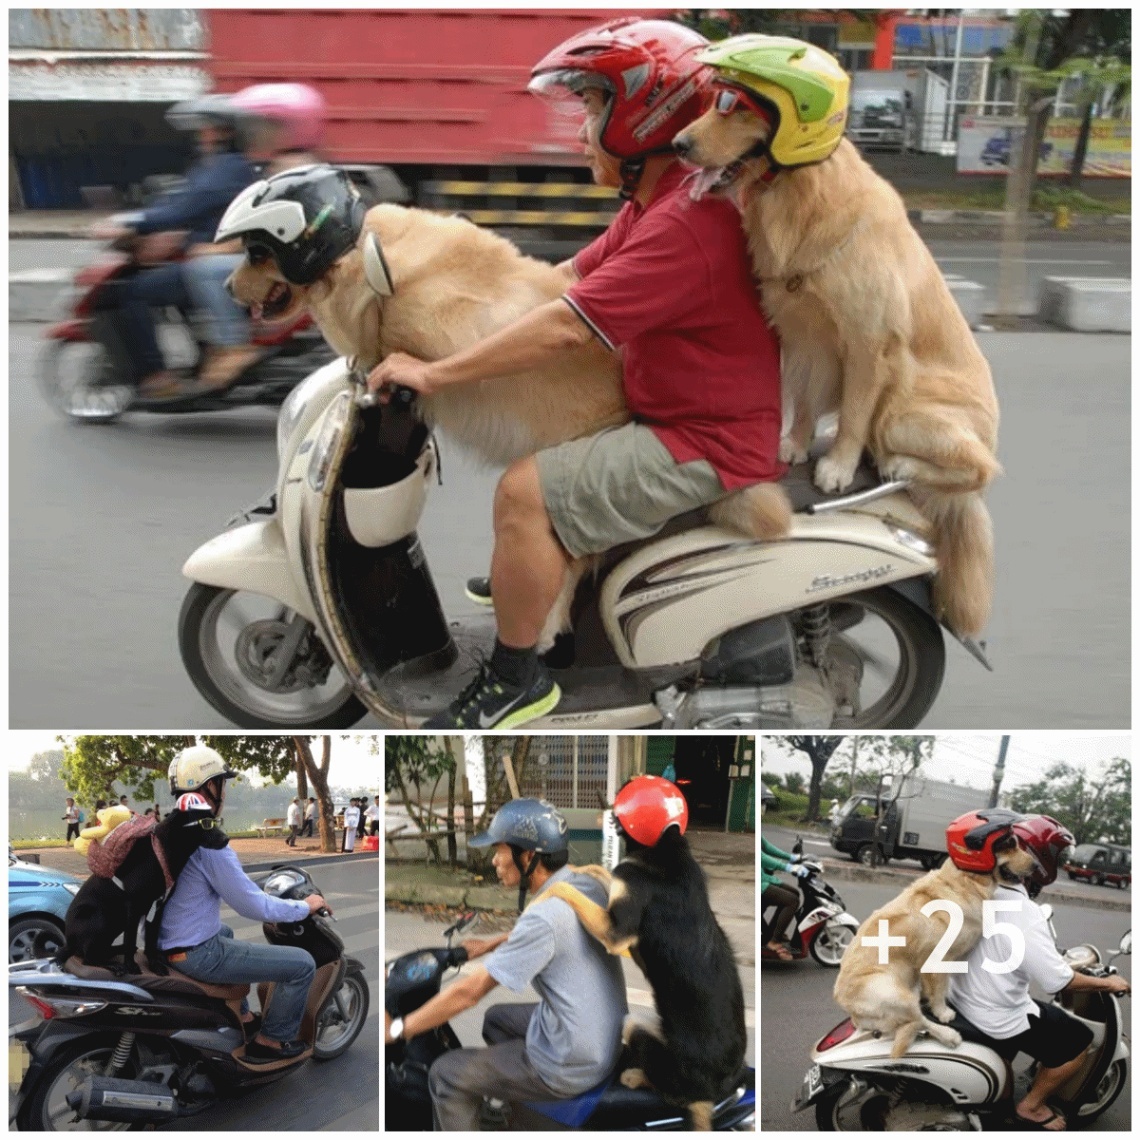 “Adorable Helmet-Wearing Dog on a Motorcycle Takes the Internet by Storm!”